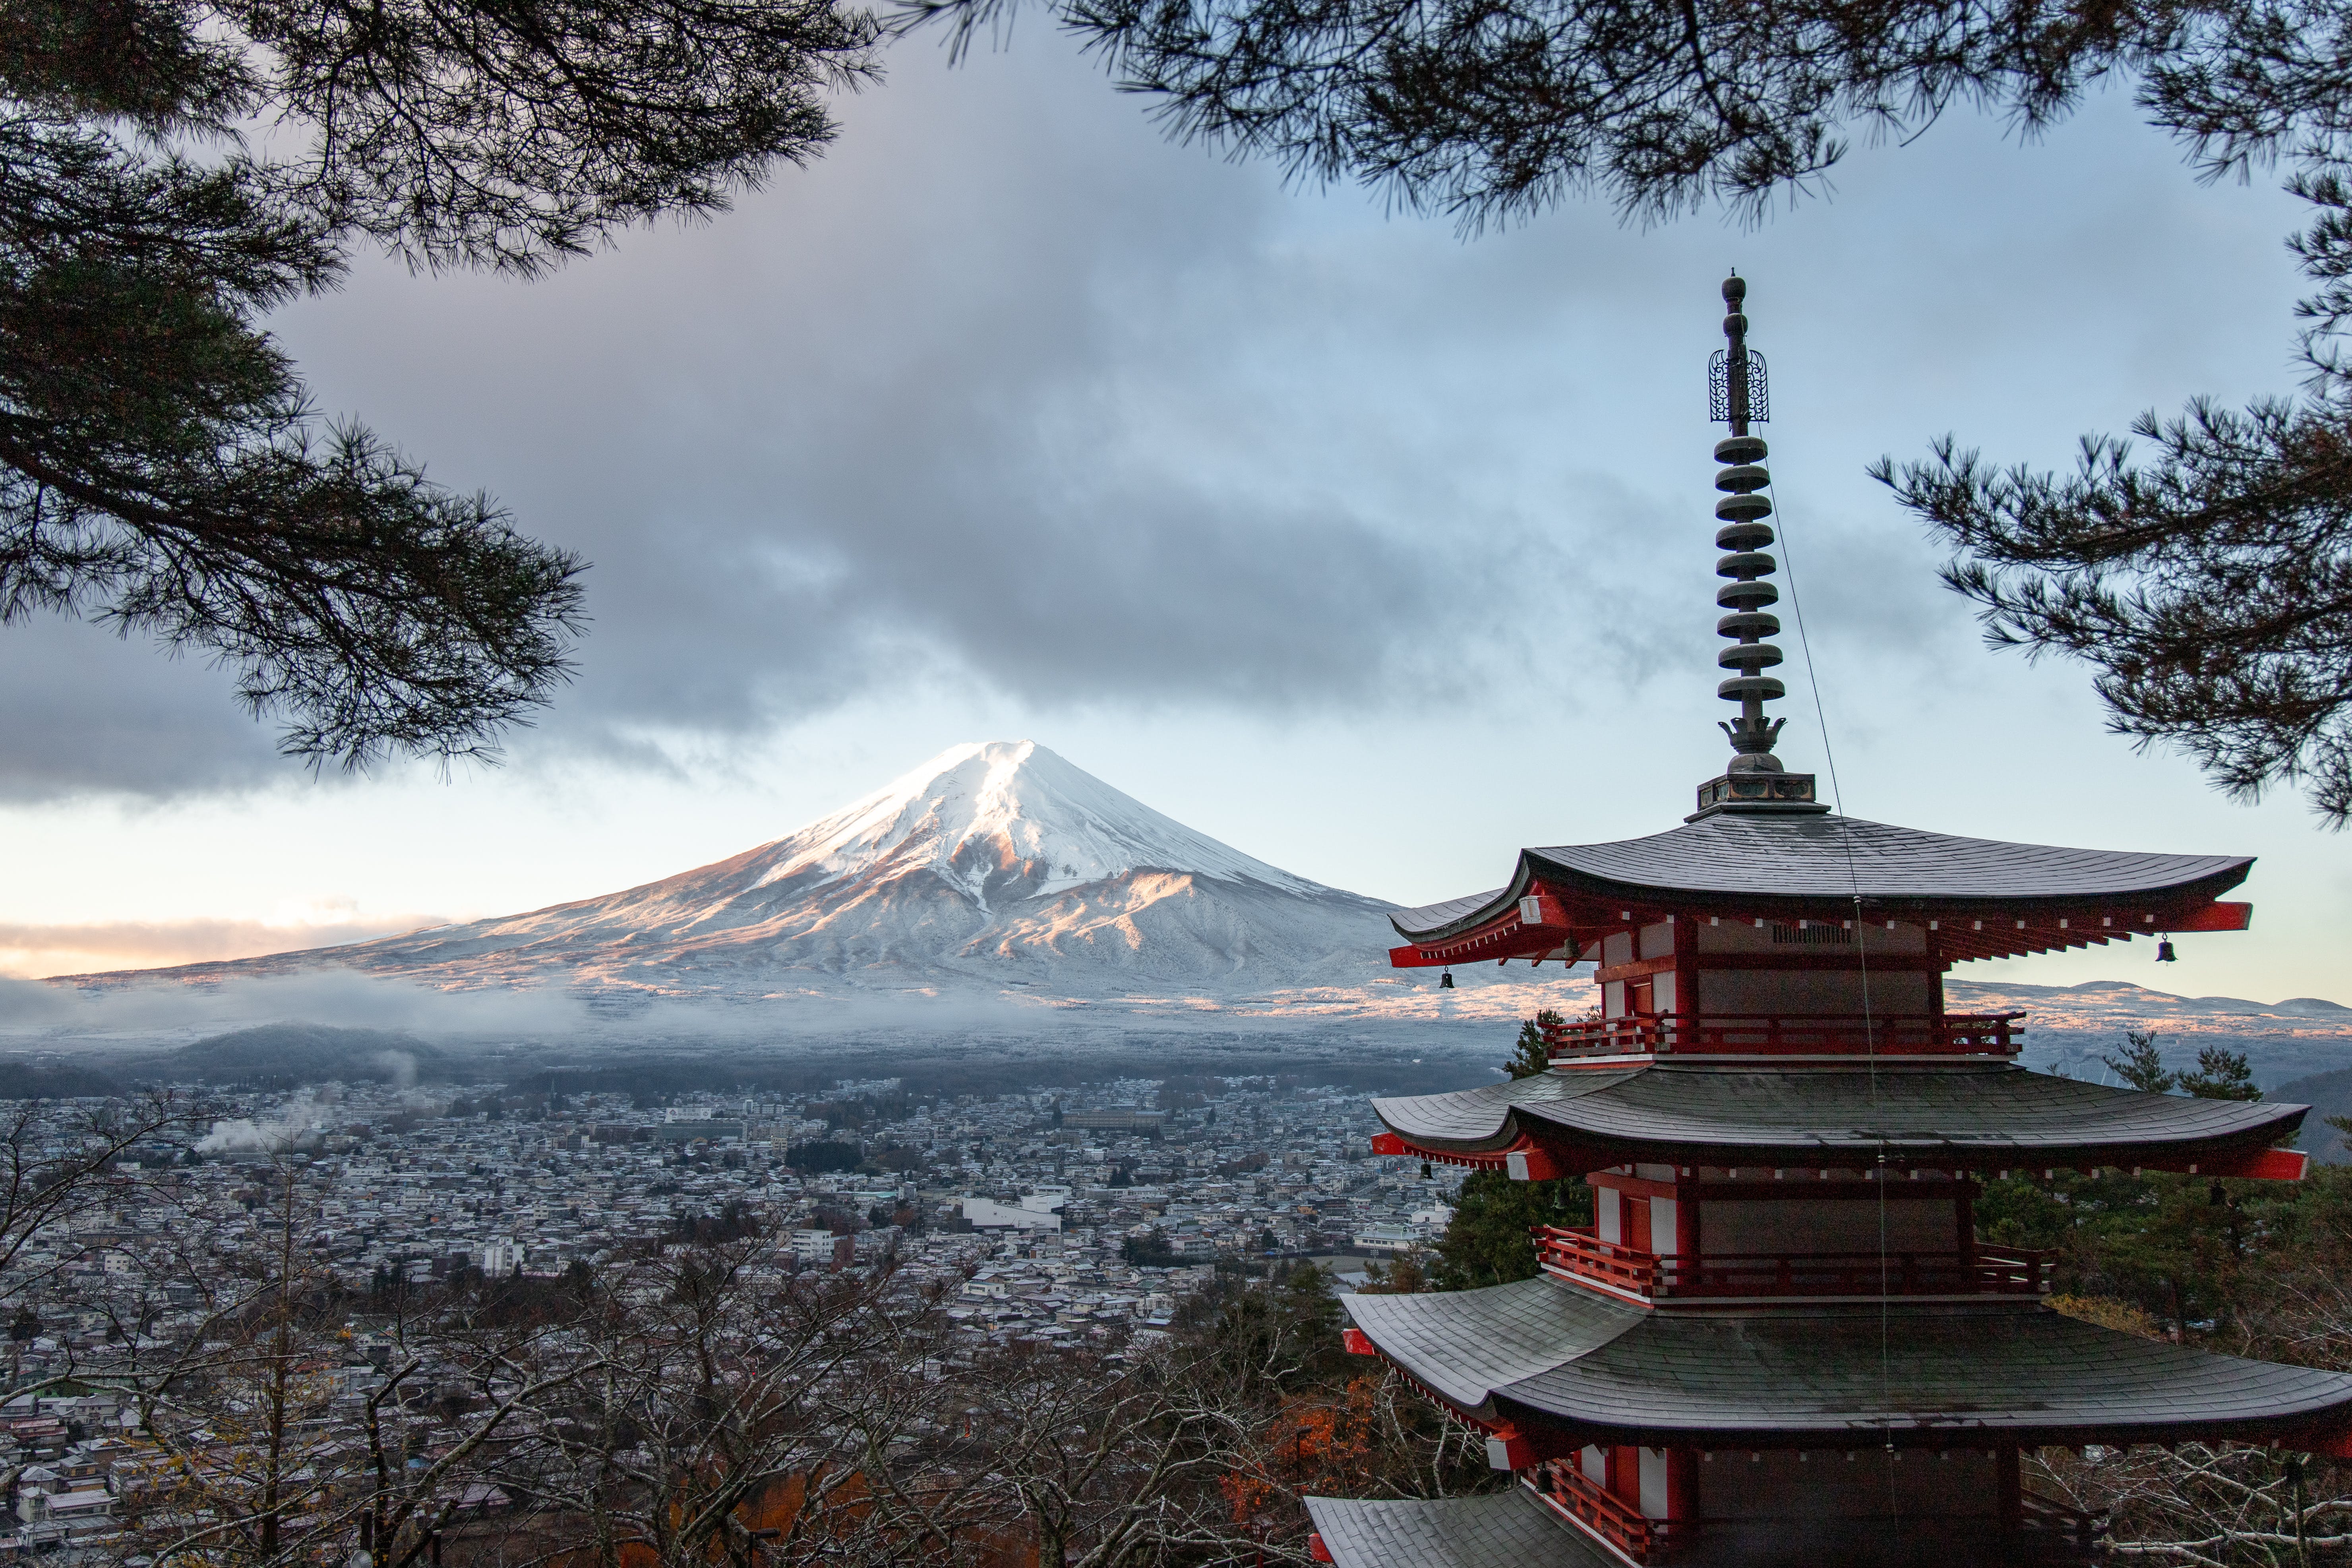 Mount Fuji looming behind a Buddhist temple in Japan